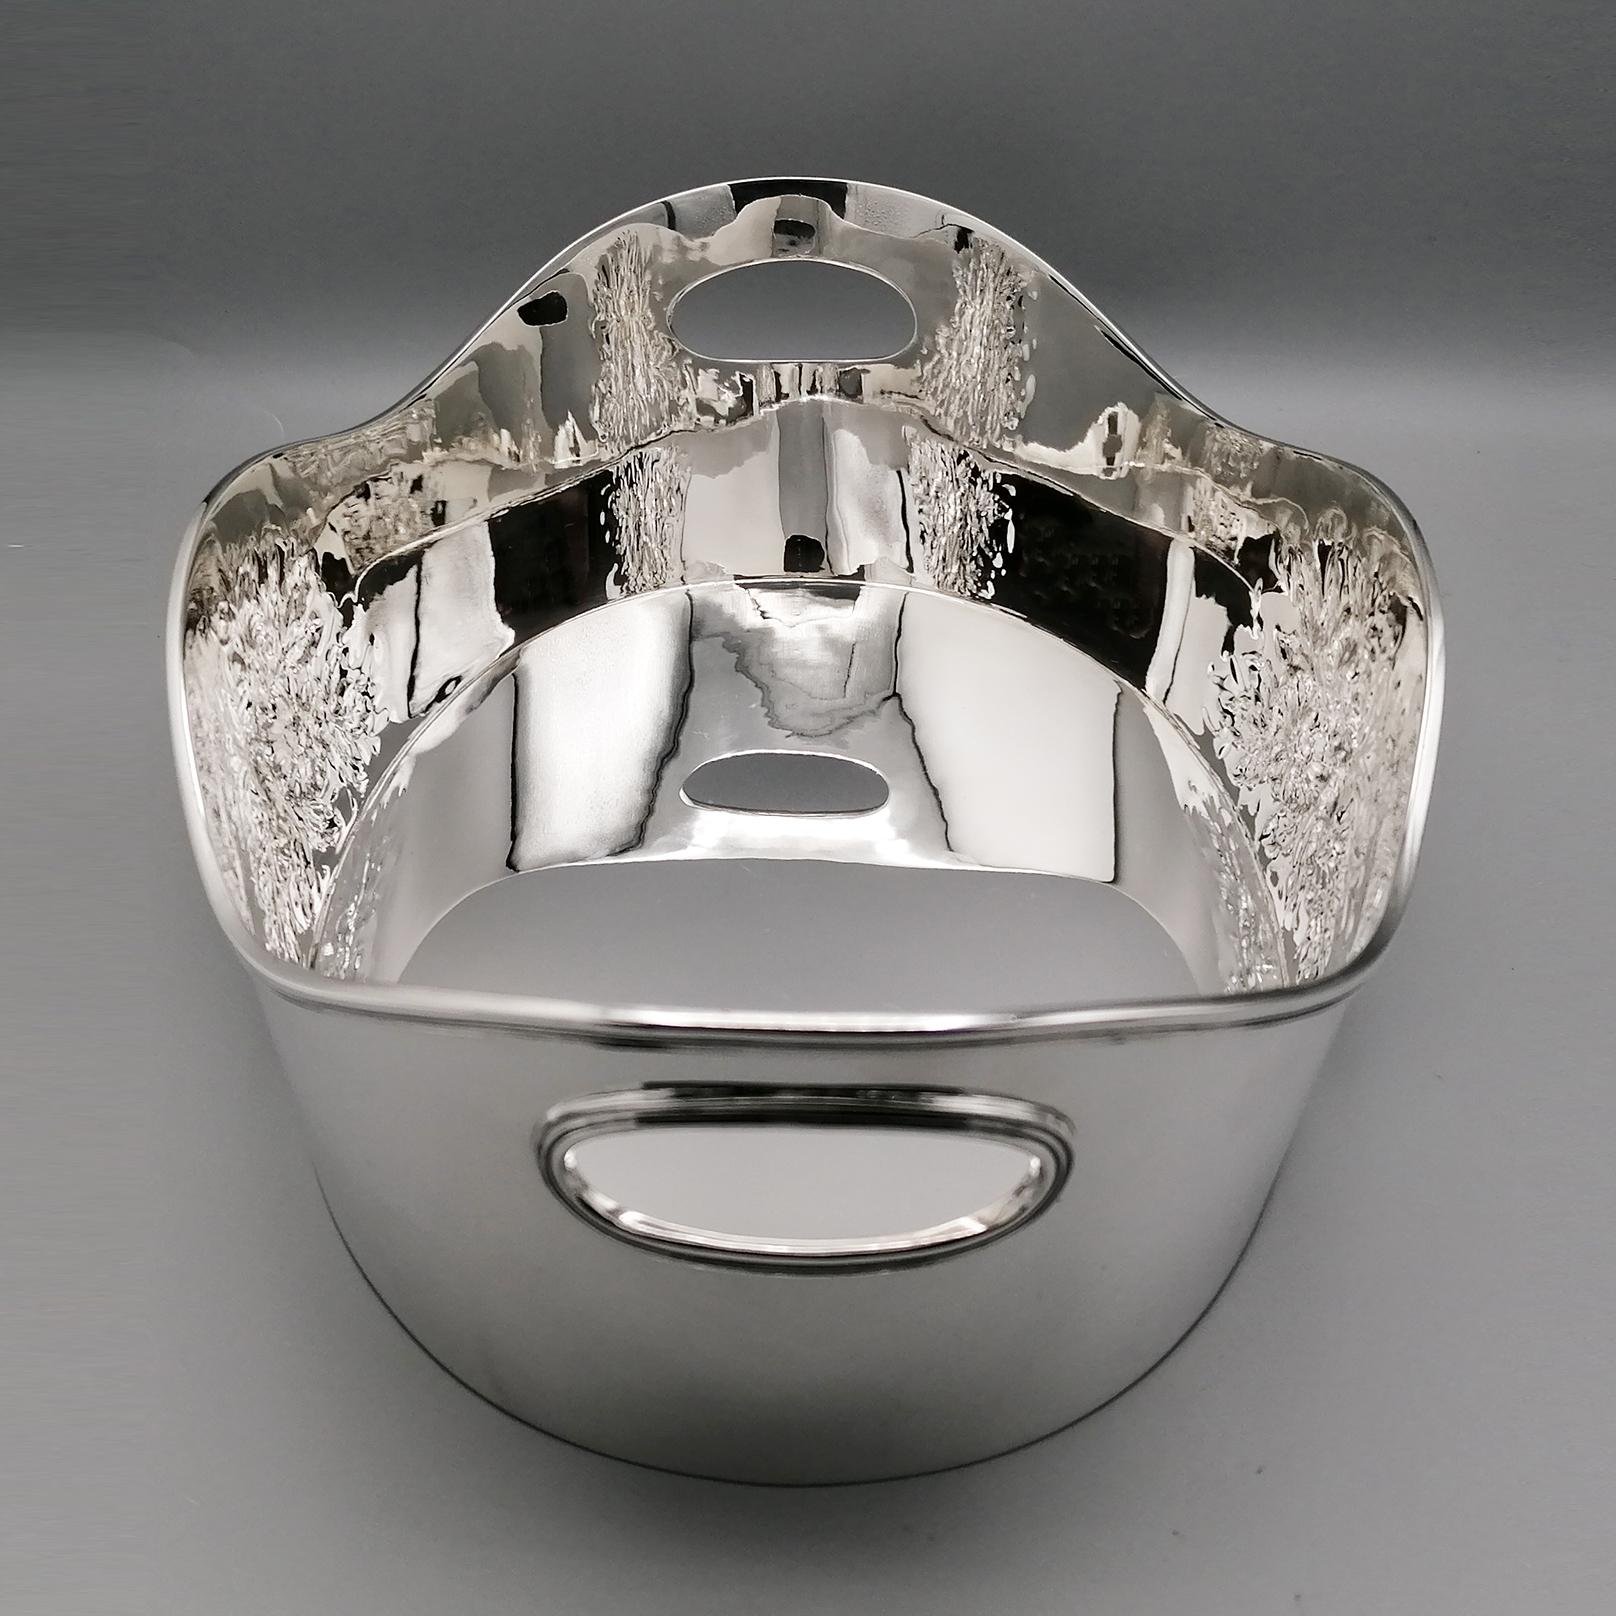 21st Century Italy Sterling Silver Bowl Centrepiece    For Sale 2